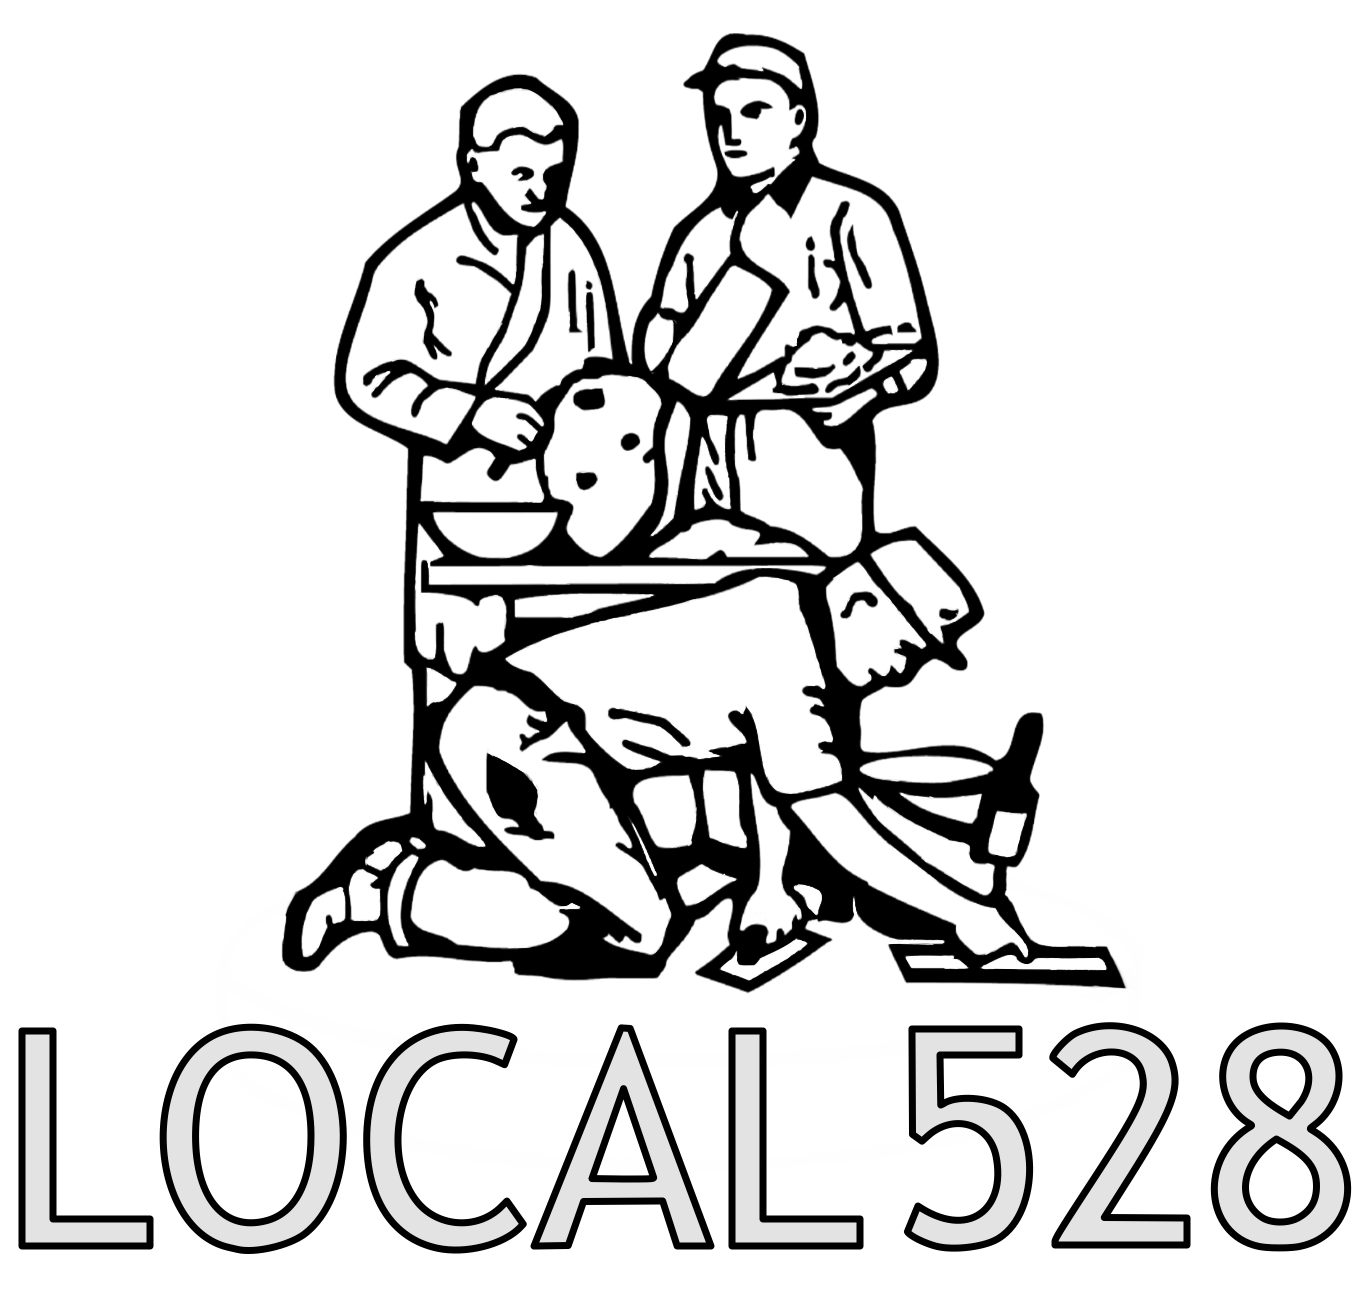 LOCAL 528 Cement Masons & Plasterers